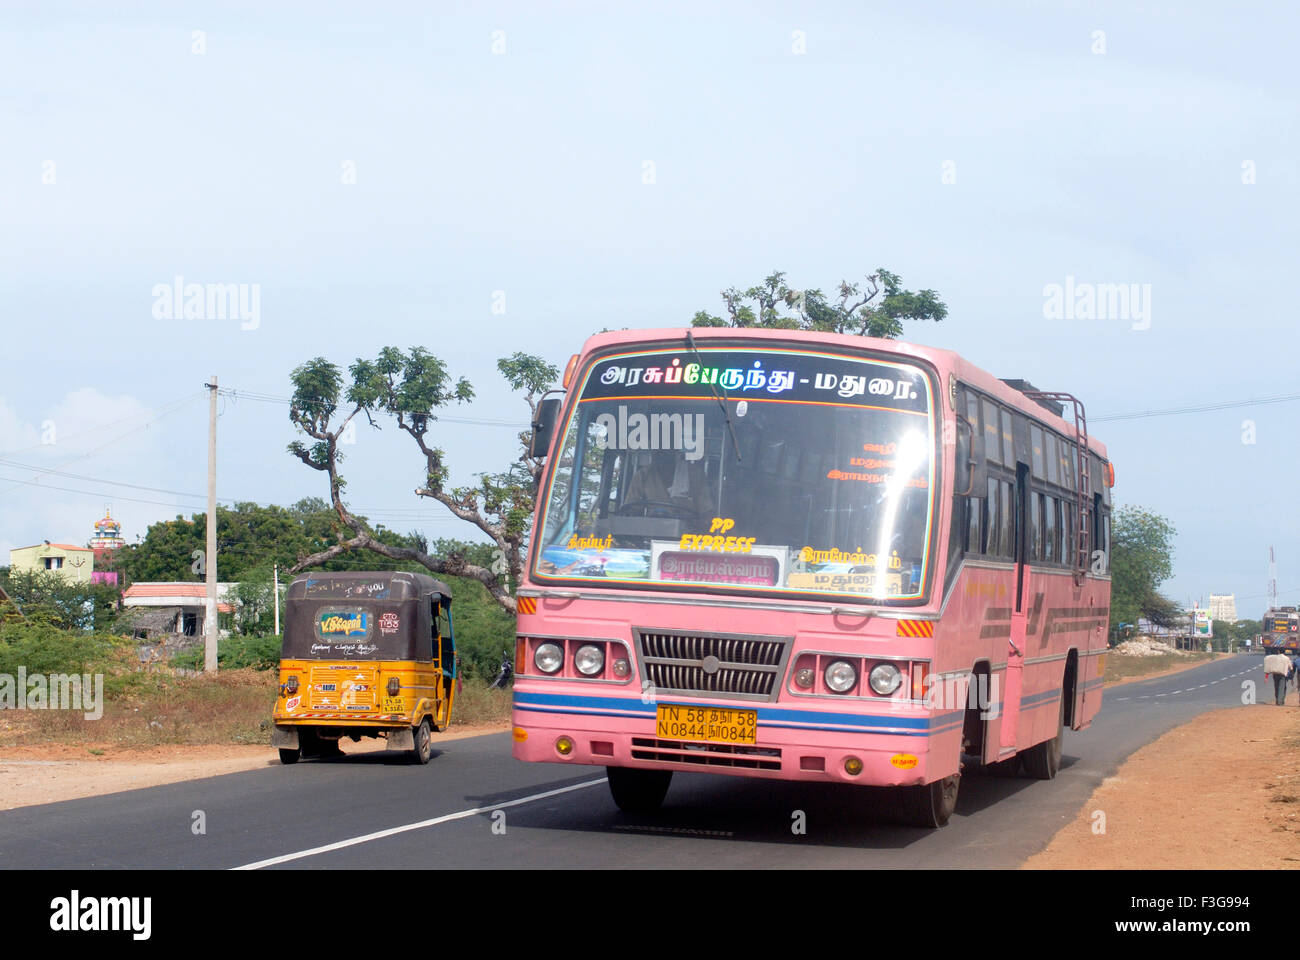 Colourful public transport bus ; traffic on national highway number 49 at Rameswaram ; Char Dham ; Tamil Nadu ; India Stock Photo